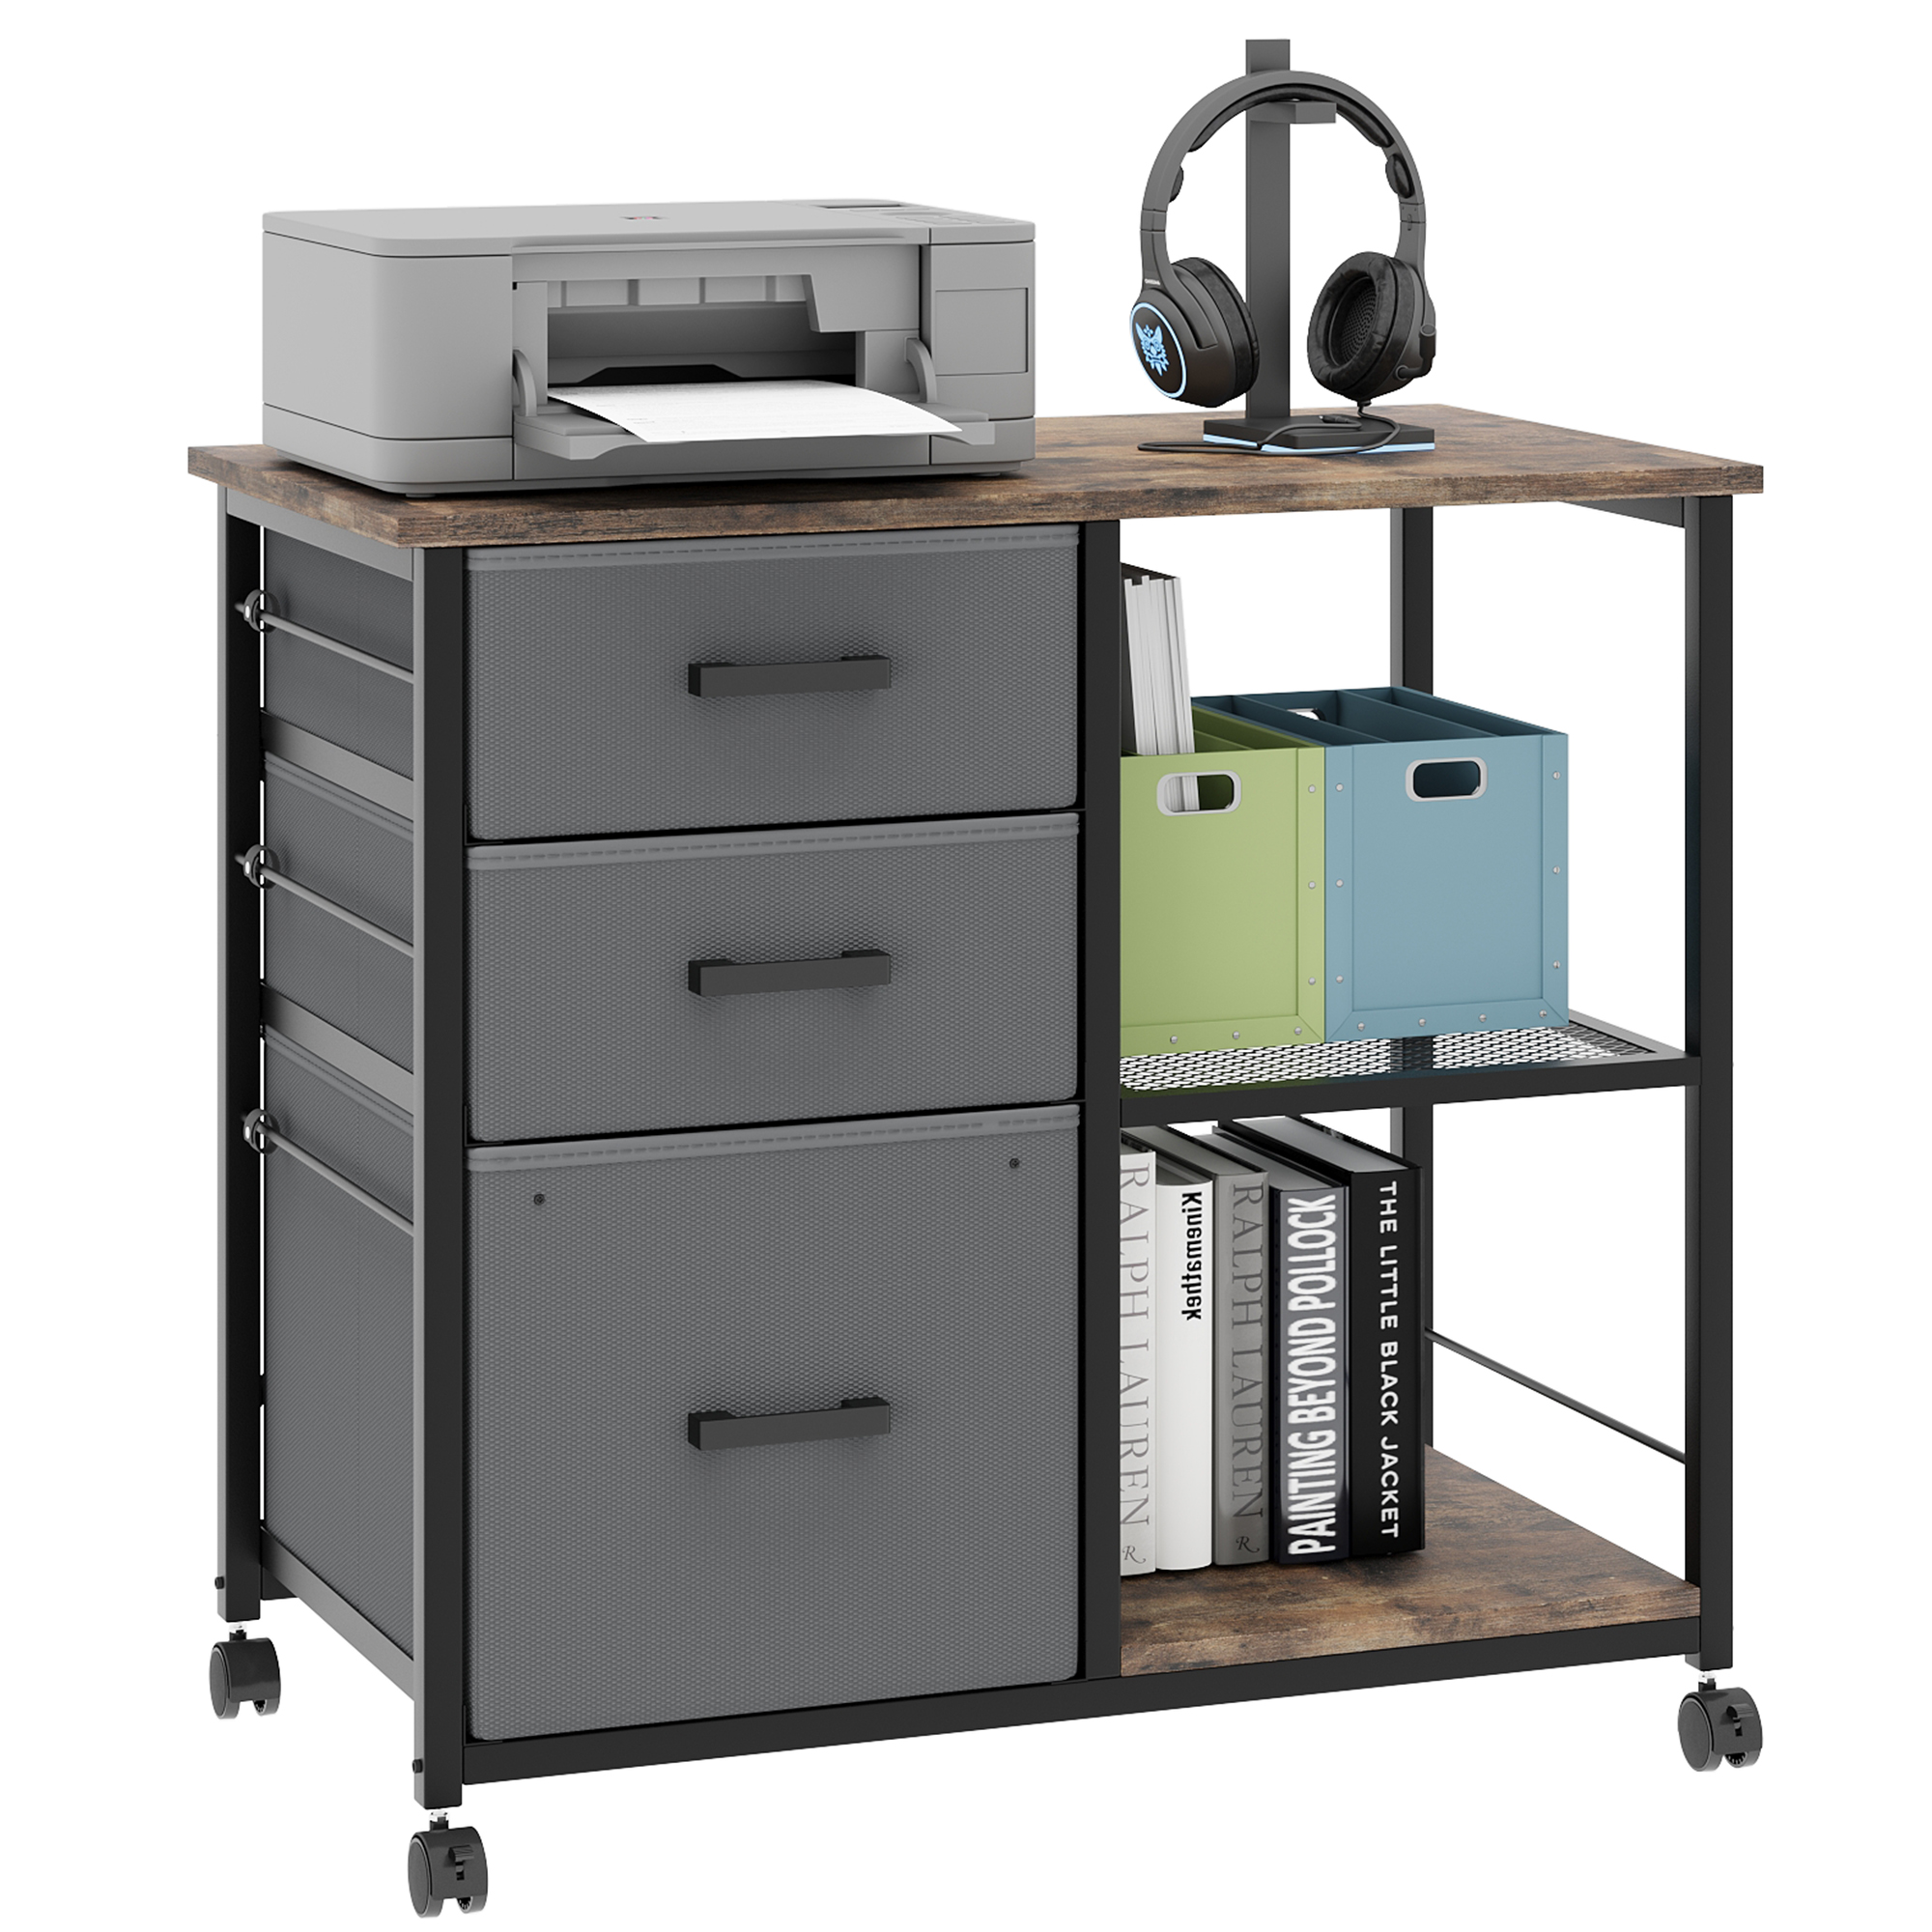 DSSTYLES Lateral File Cabinet, 3 Drawer File Cabinet, Mobile Filing Cabinet Printer Stand Fits A4 or Letter Size, Lateral File Cabinet with Wheels, Under Desk Storage Cabinet for Home Office, Grey - image 1 of 8